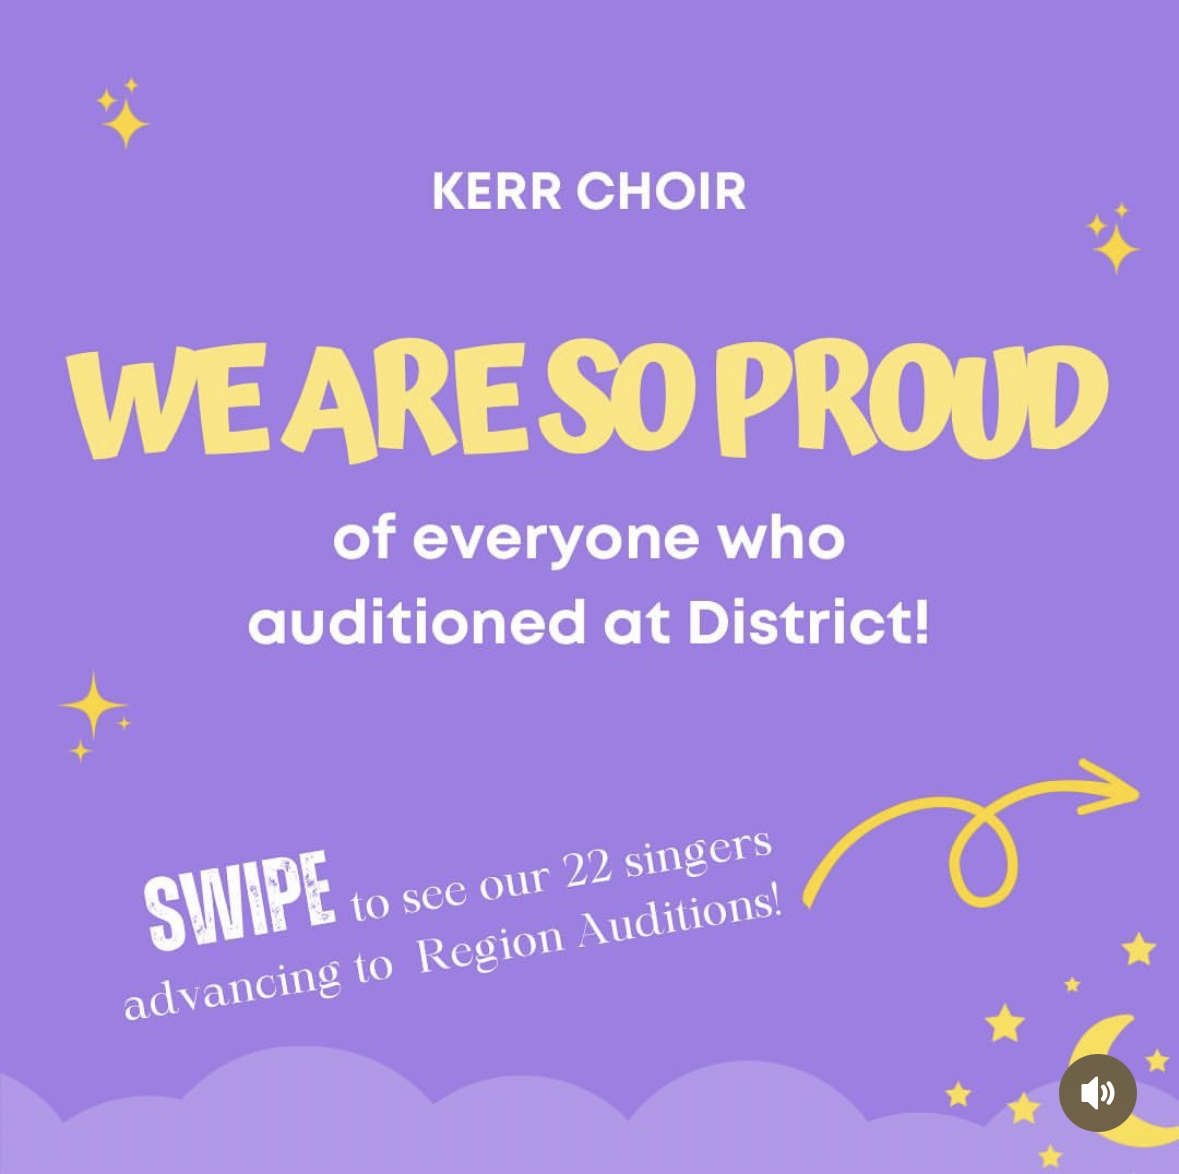 Choir Audition Results. 
22 students have been announced to be advancing to the regional auditions.